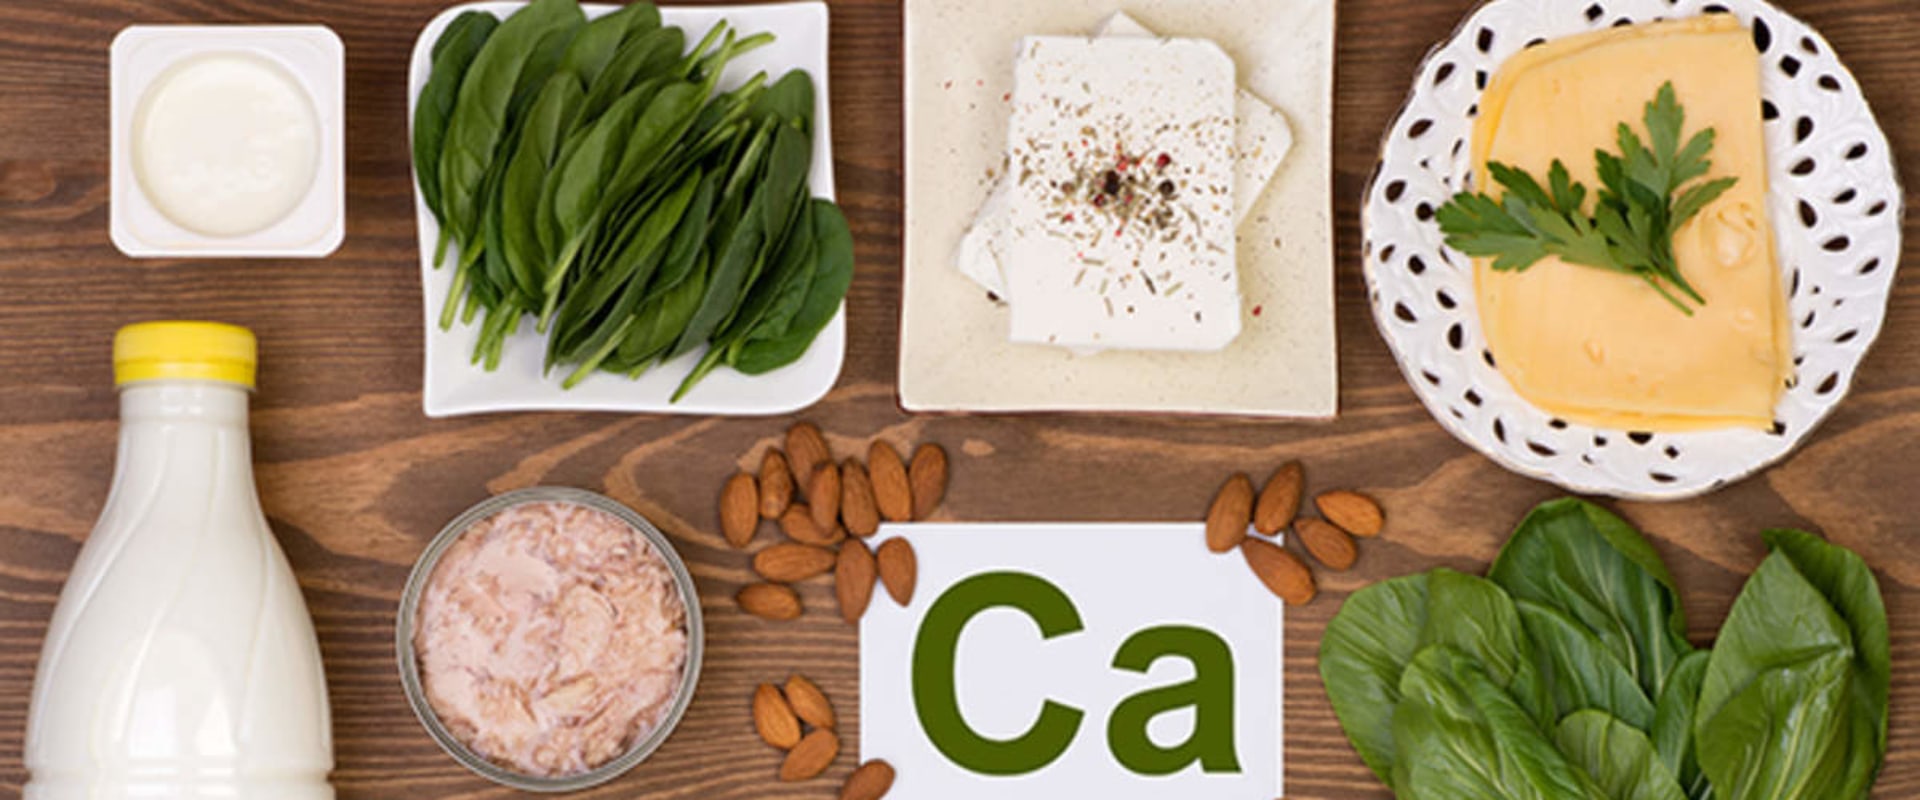 Calcium: What You Need to Know